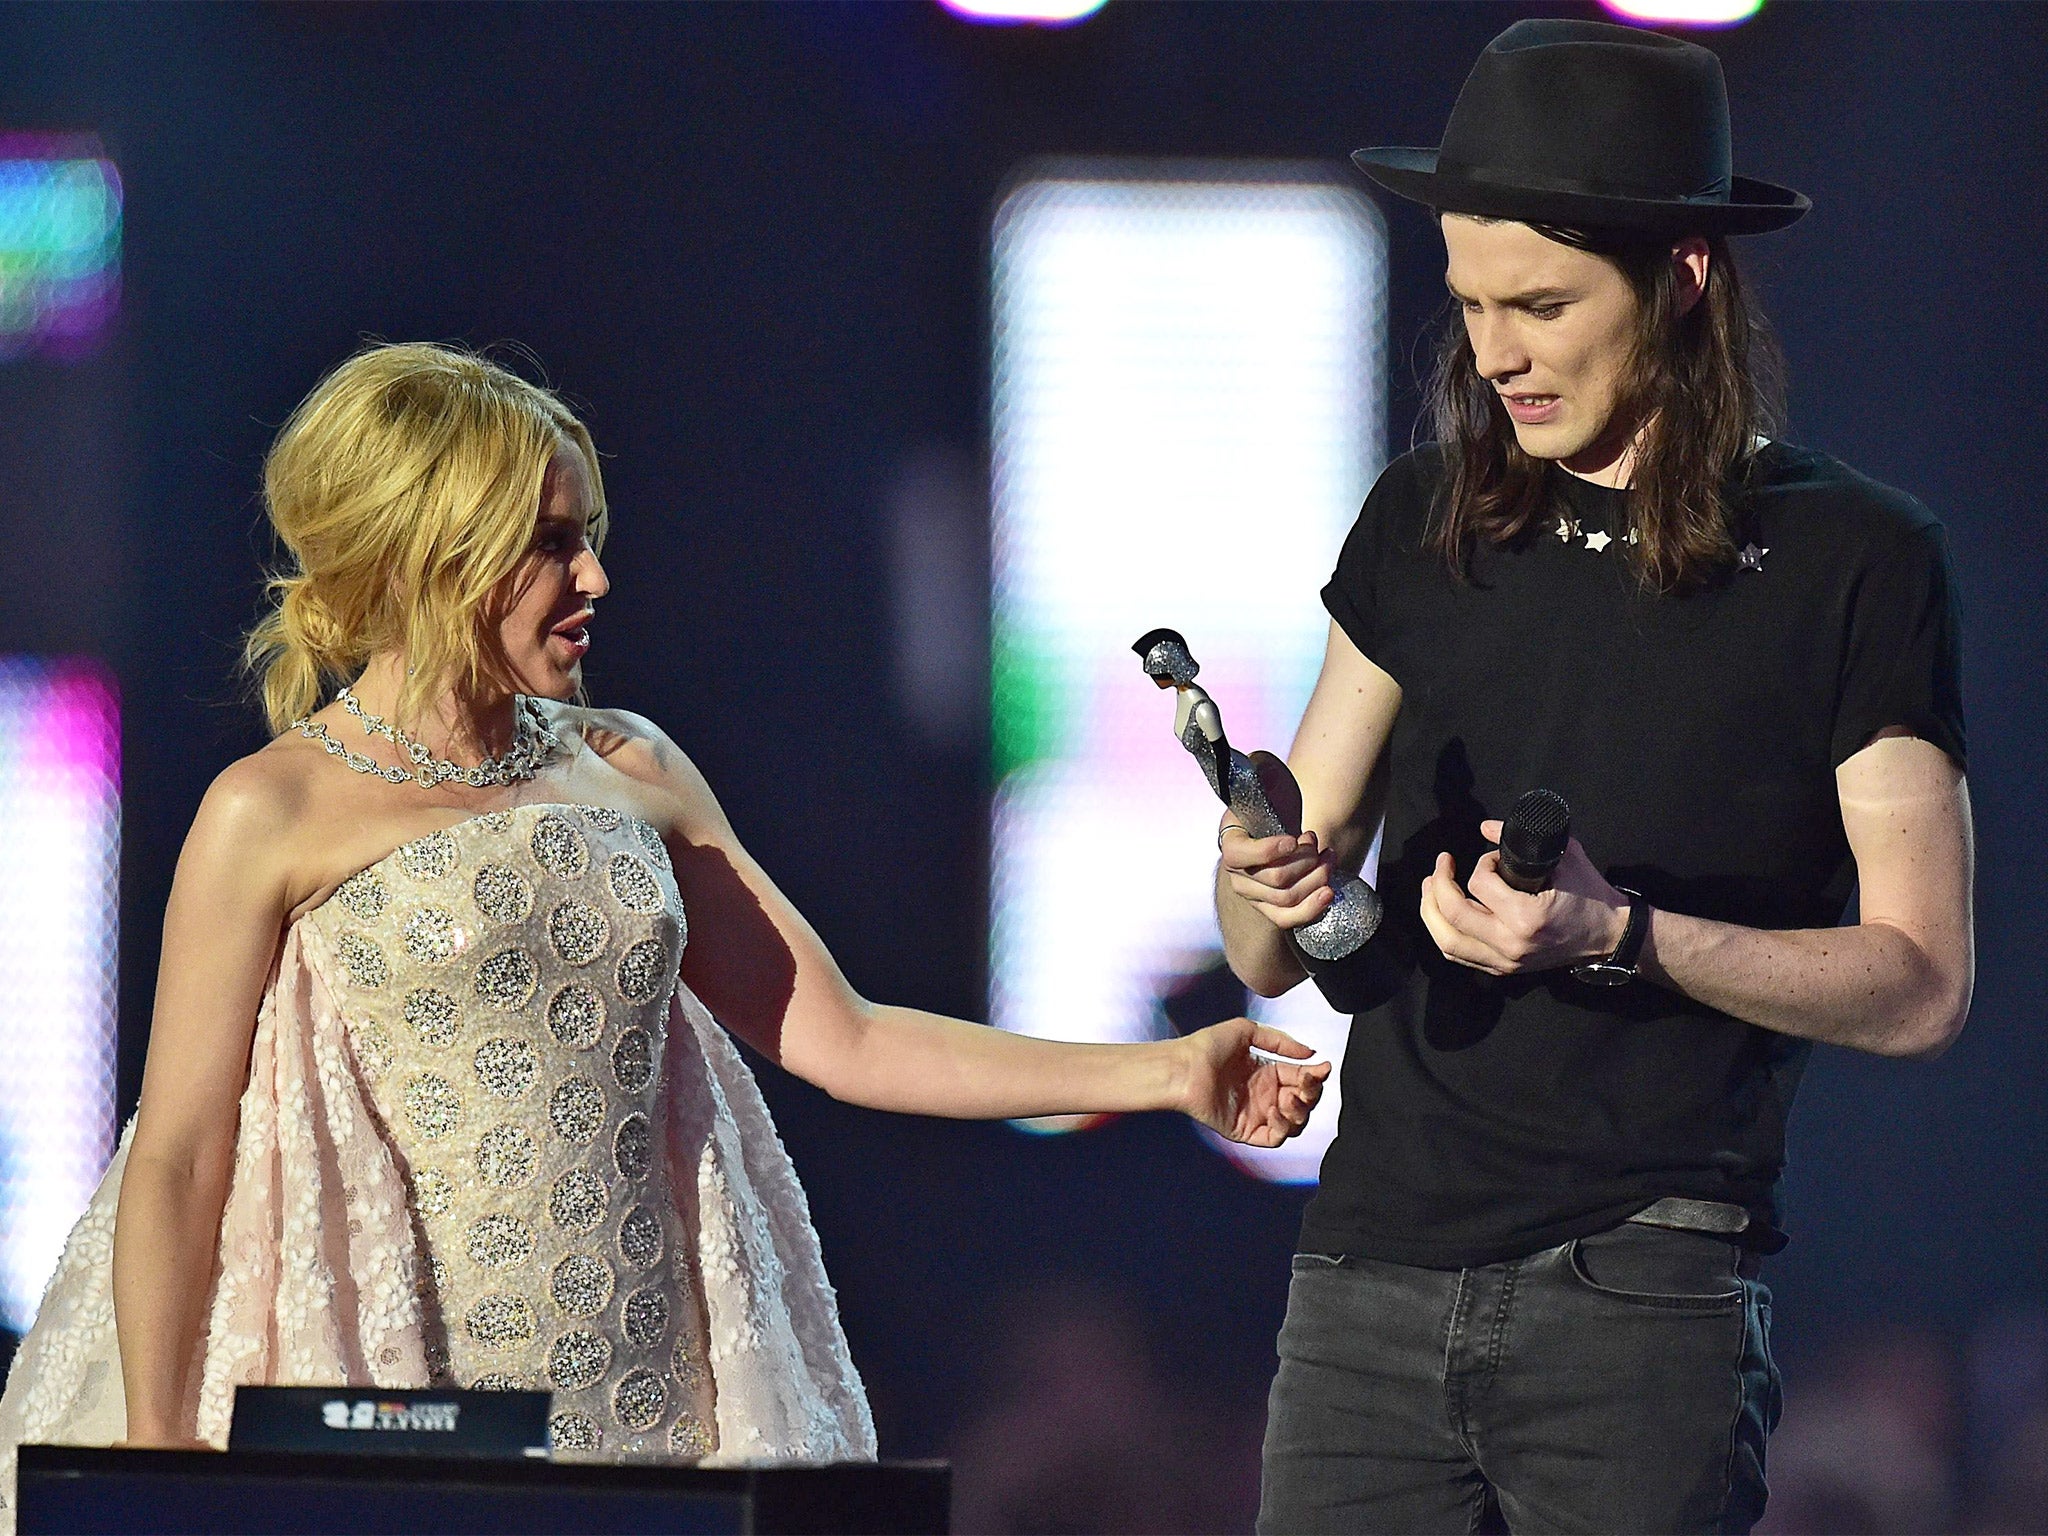 James Bay receives his Best British Male Solo Artist award from Kylie Minogue